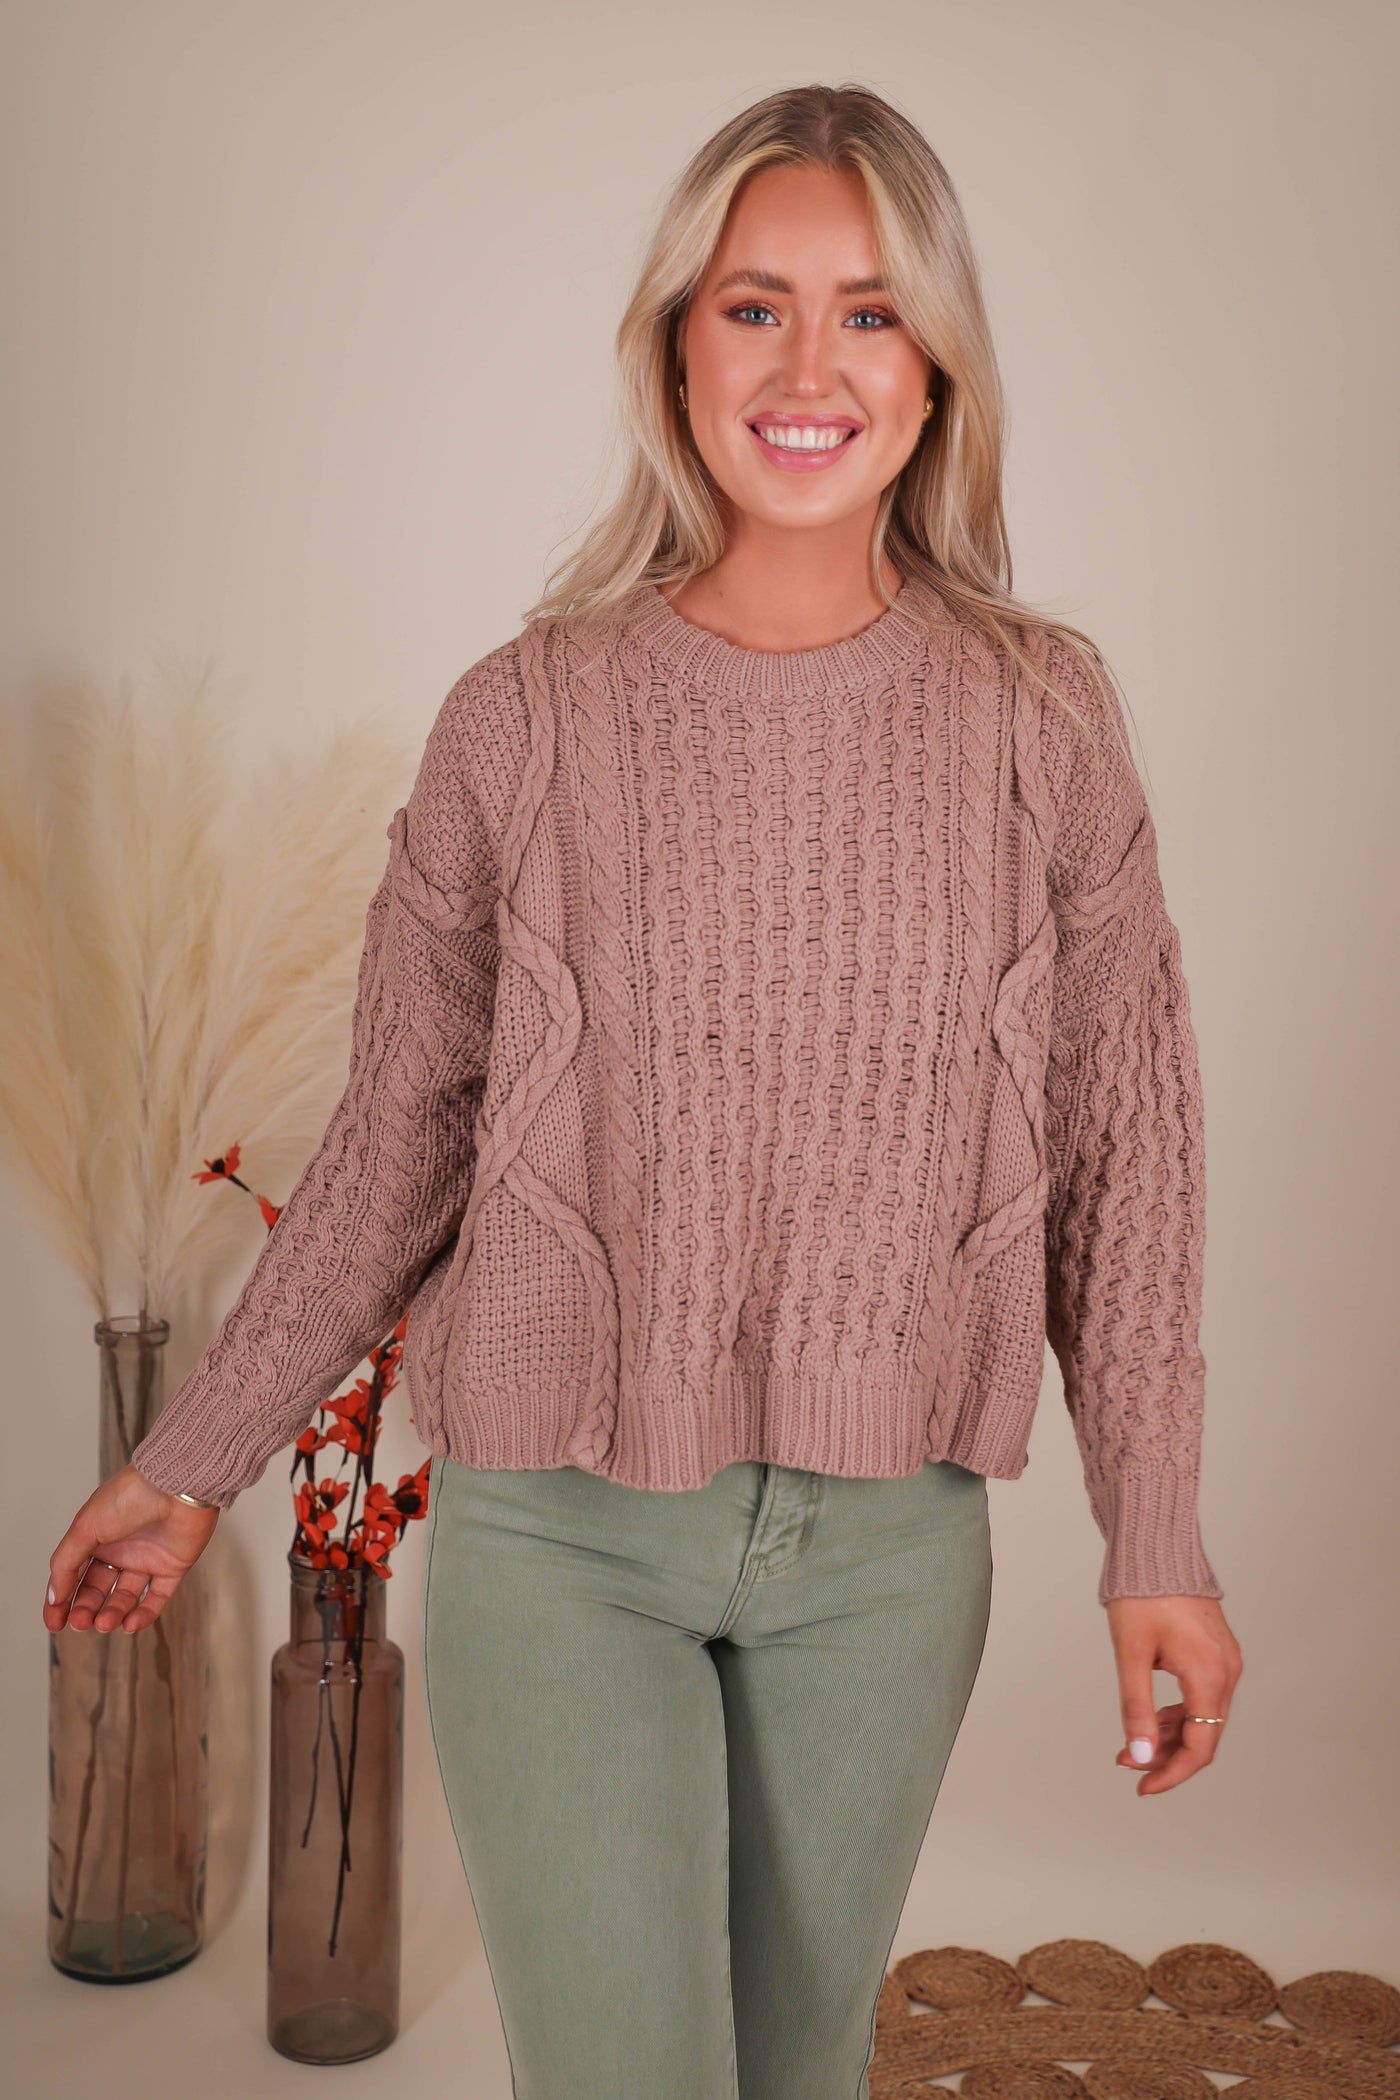 Women's Brown Cable Knit Sweater- Women's Cozy Fall Sweaters- &Merci Sweaters